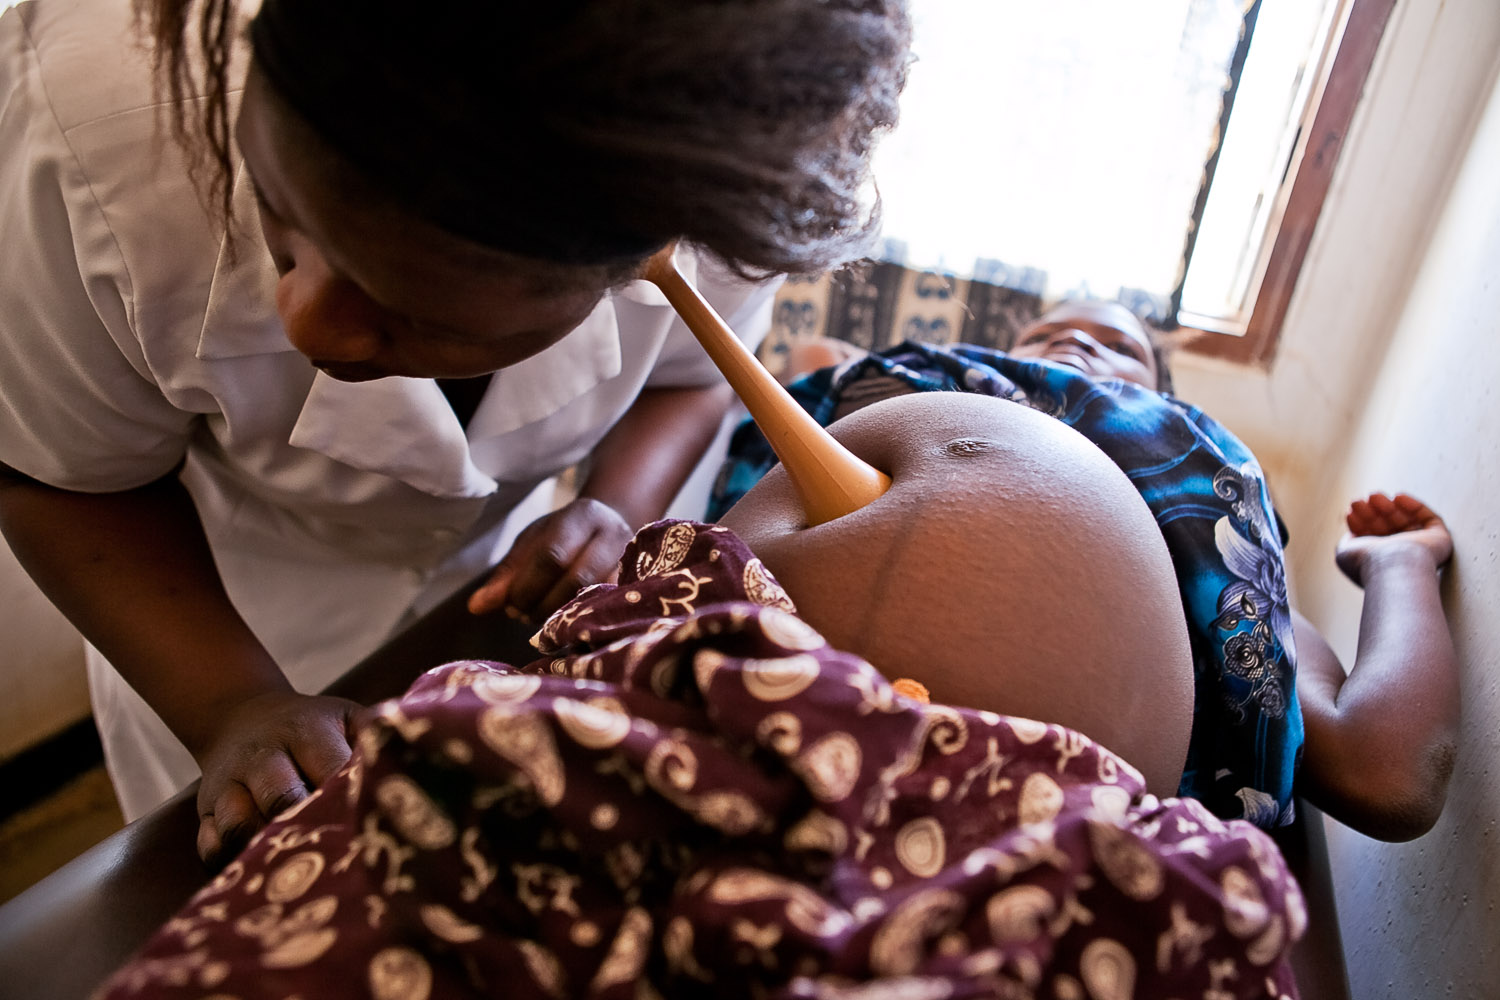 Paolo Patruno Photographs Maternal Health in Africa